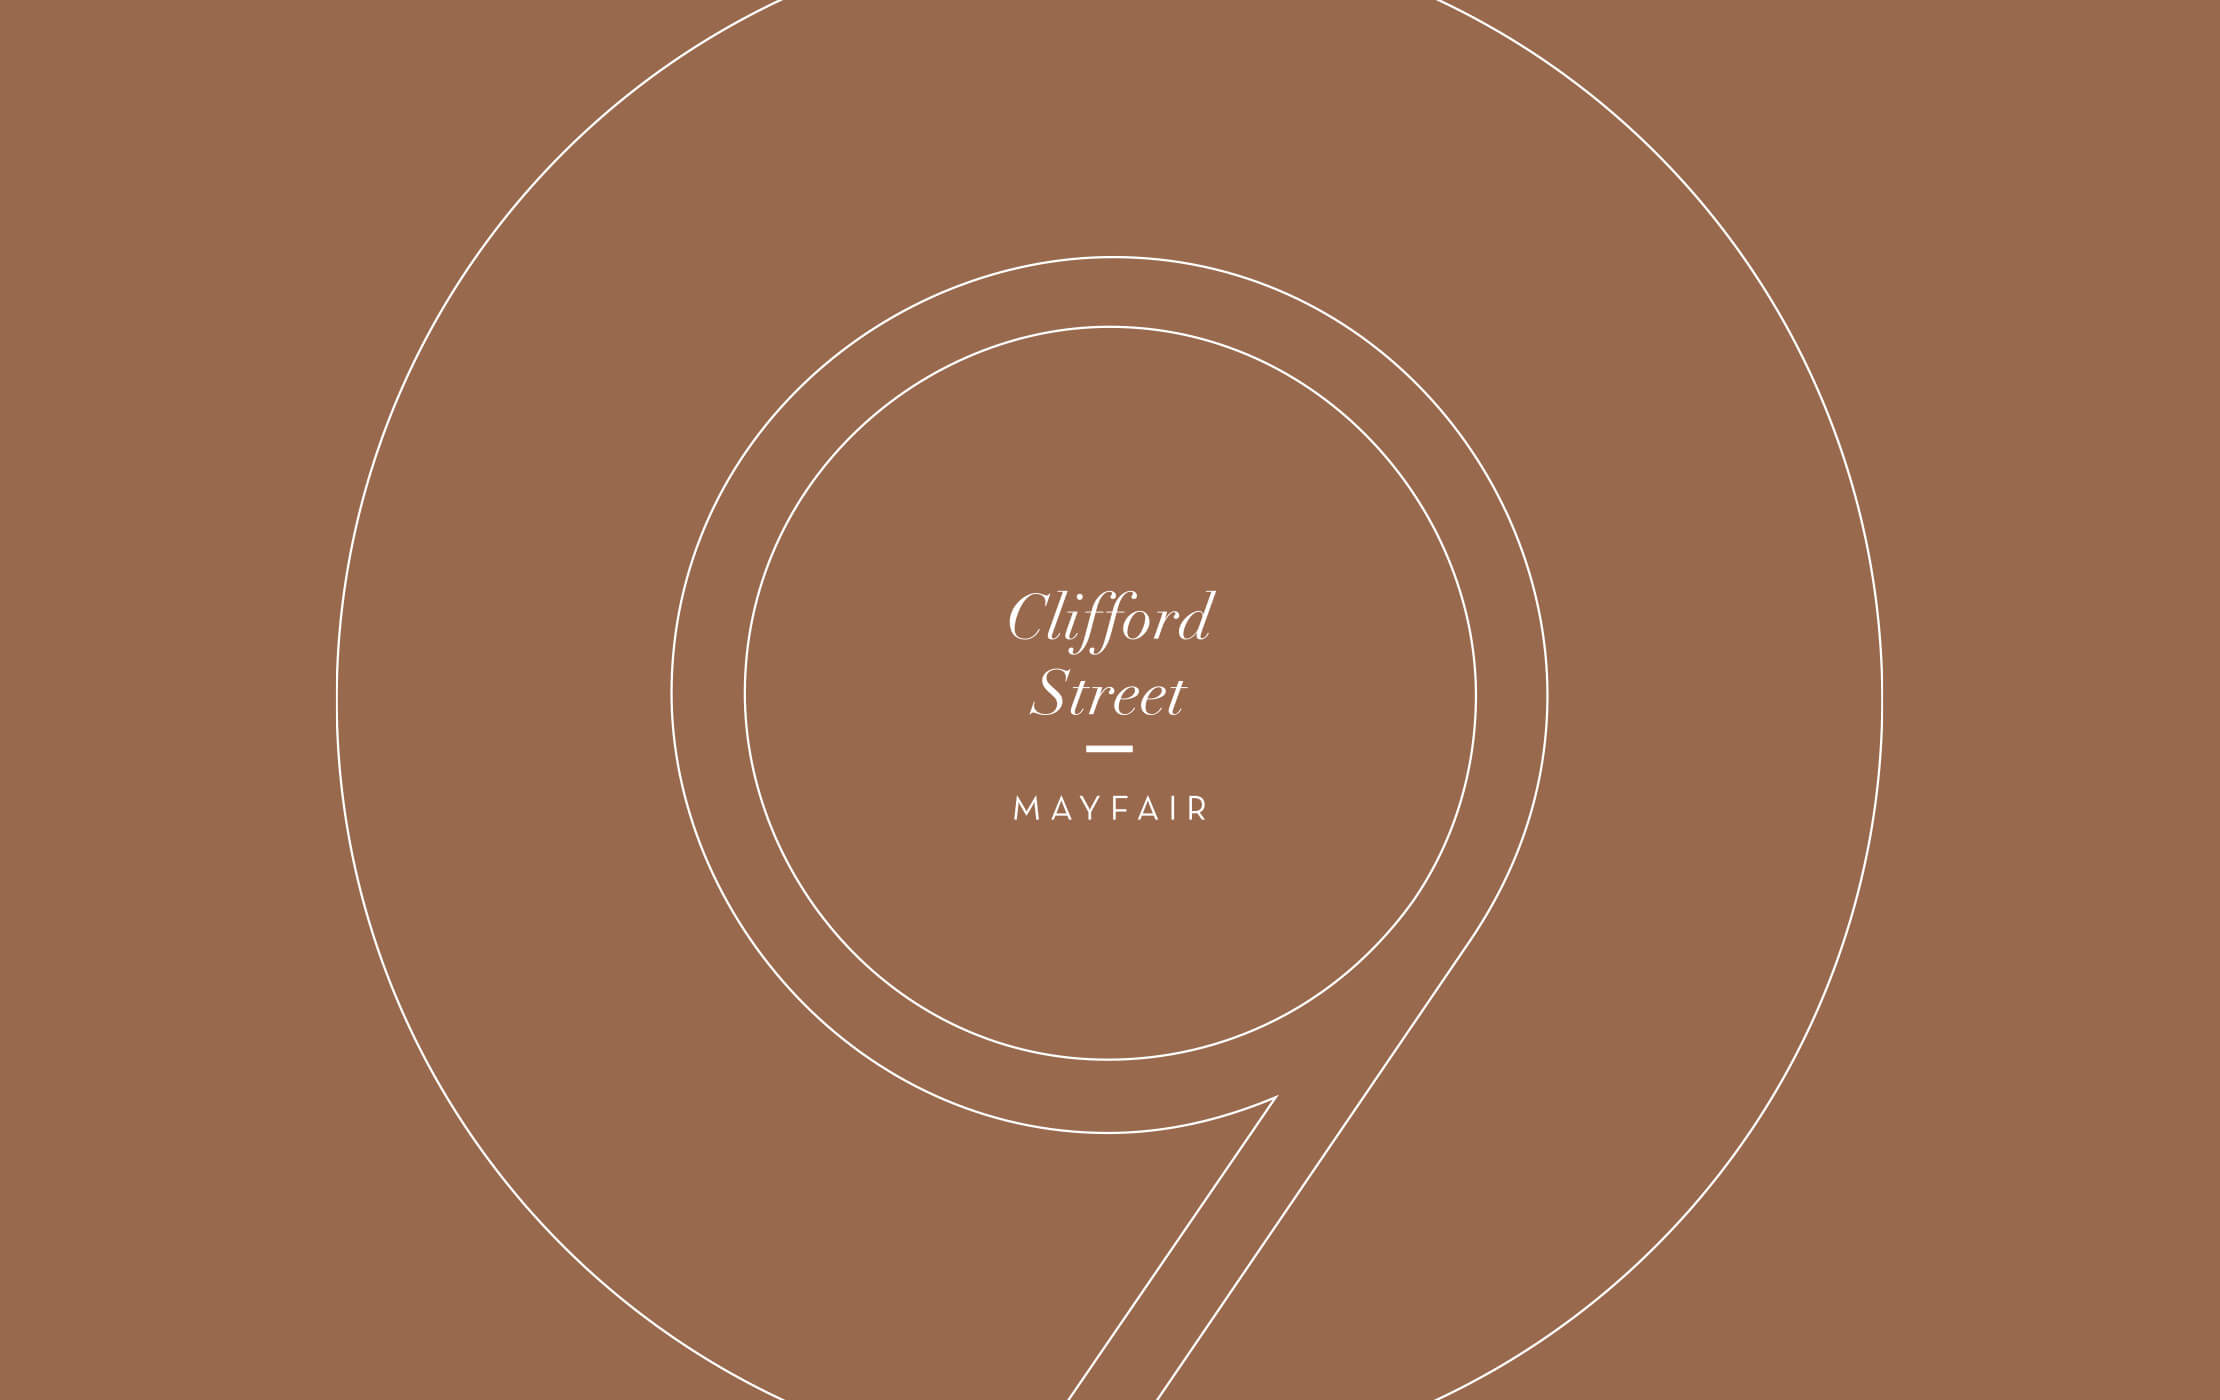 White 9 Clifford Street logo printed on a dark gold brochure cover